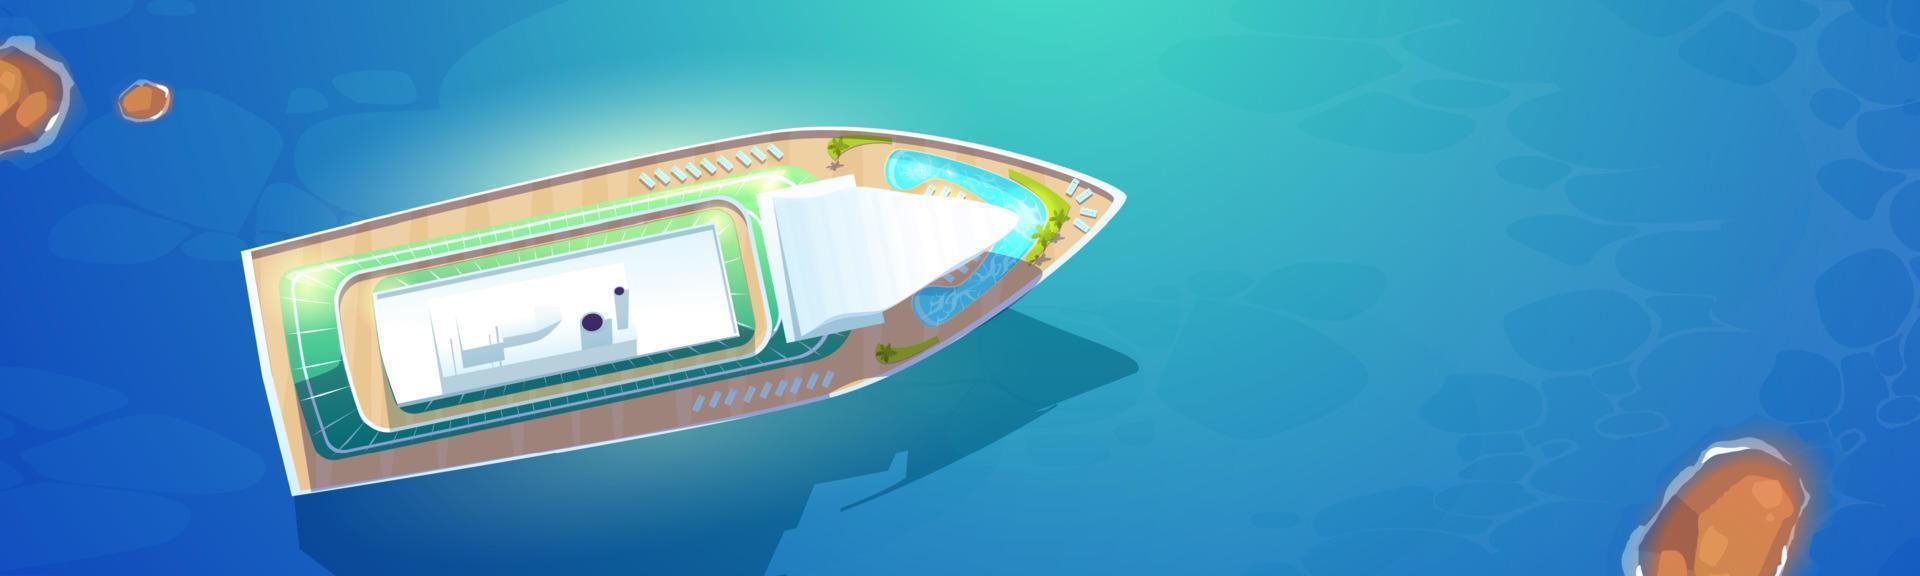 Top view of sea and cruise ship with pool on deck vector